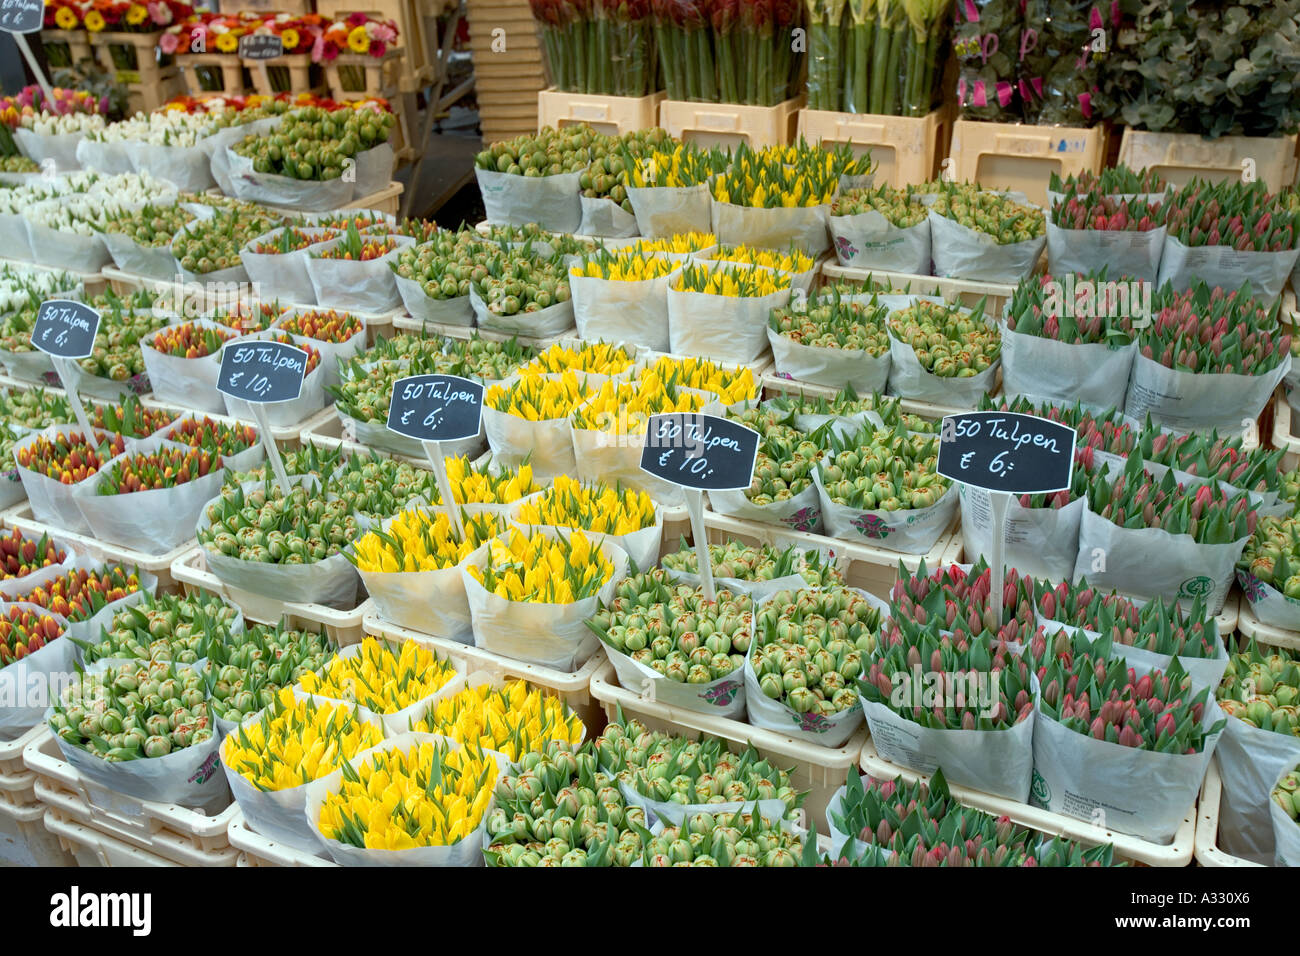 Tulips for sale in Amsterdam, Netherlands. Stock Photo